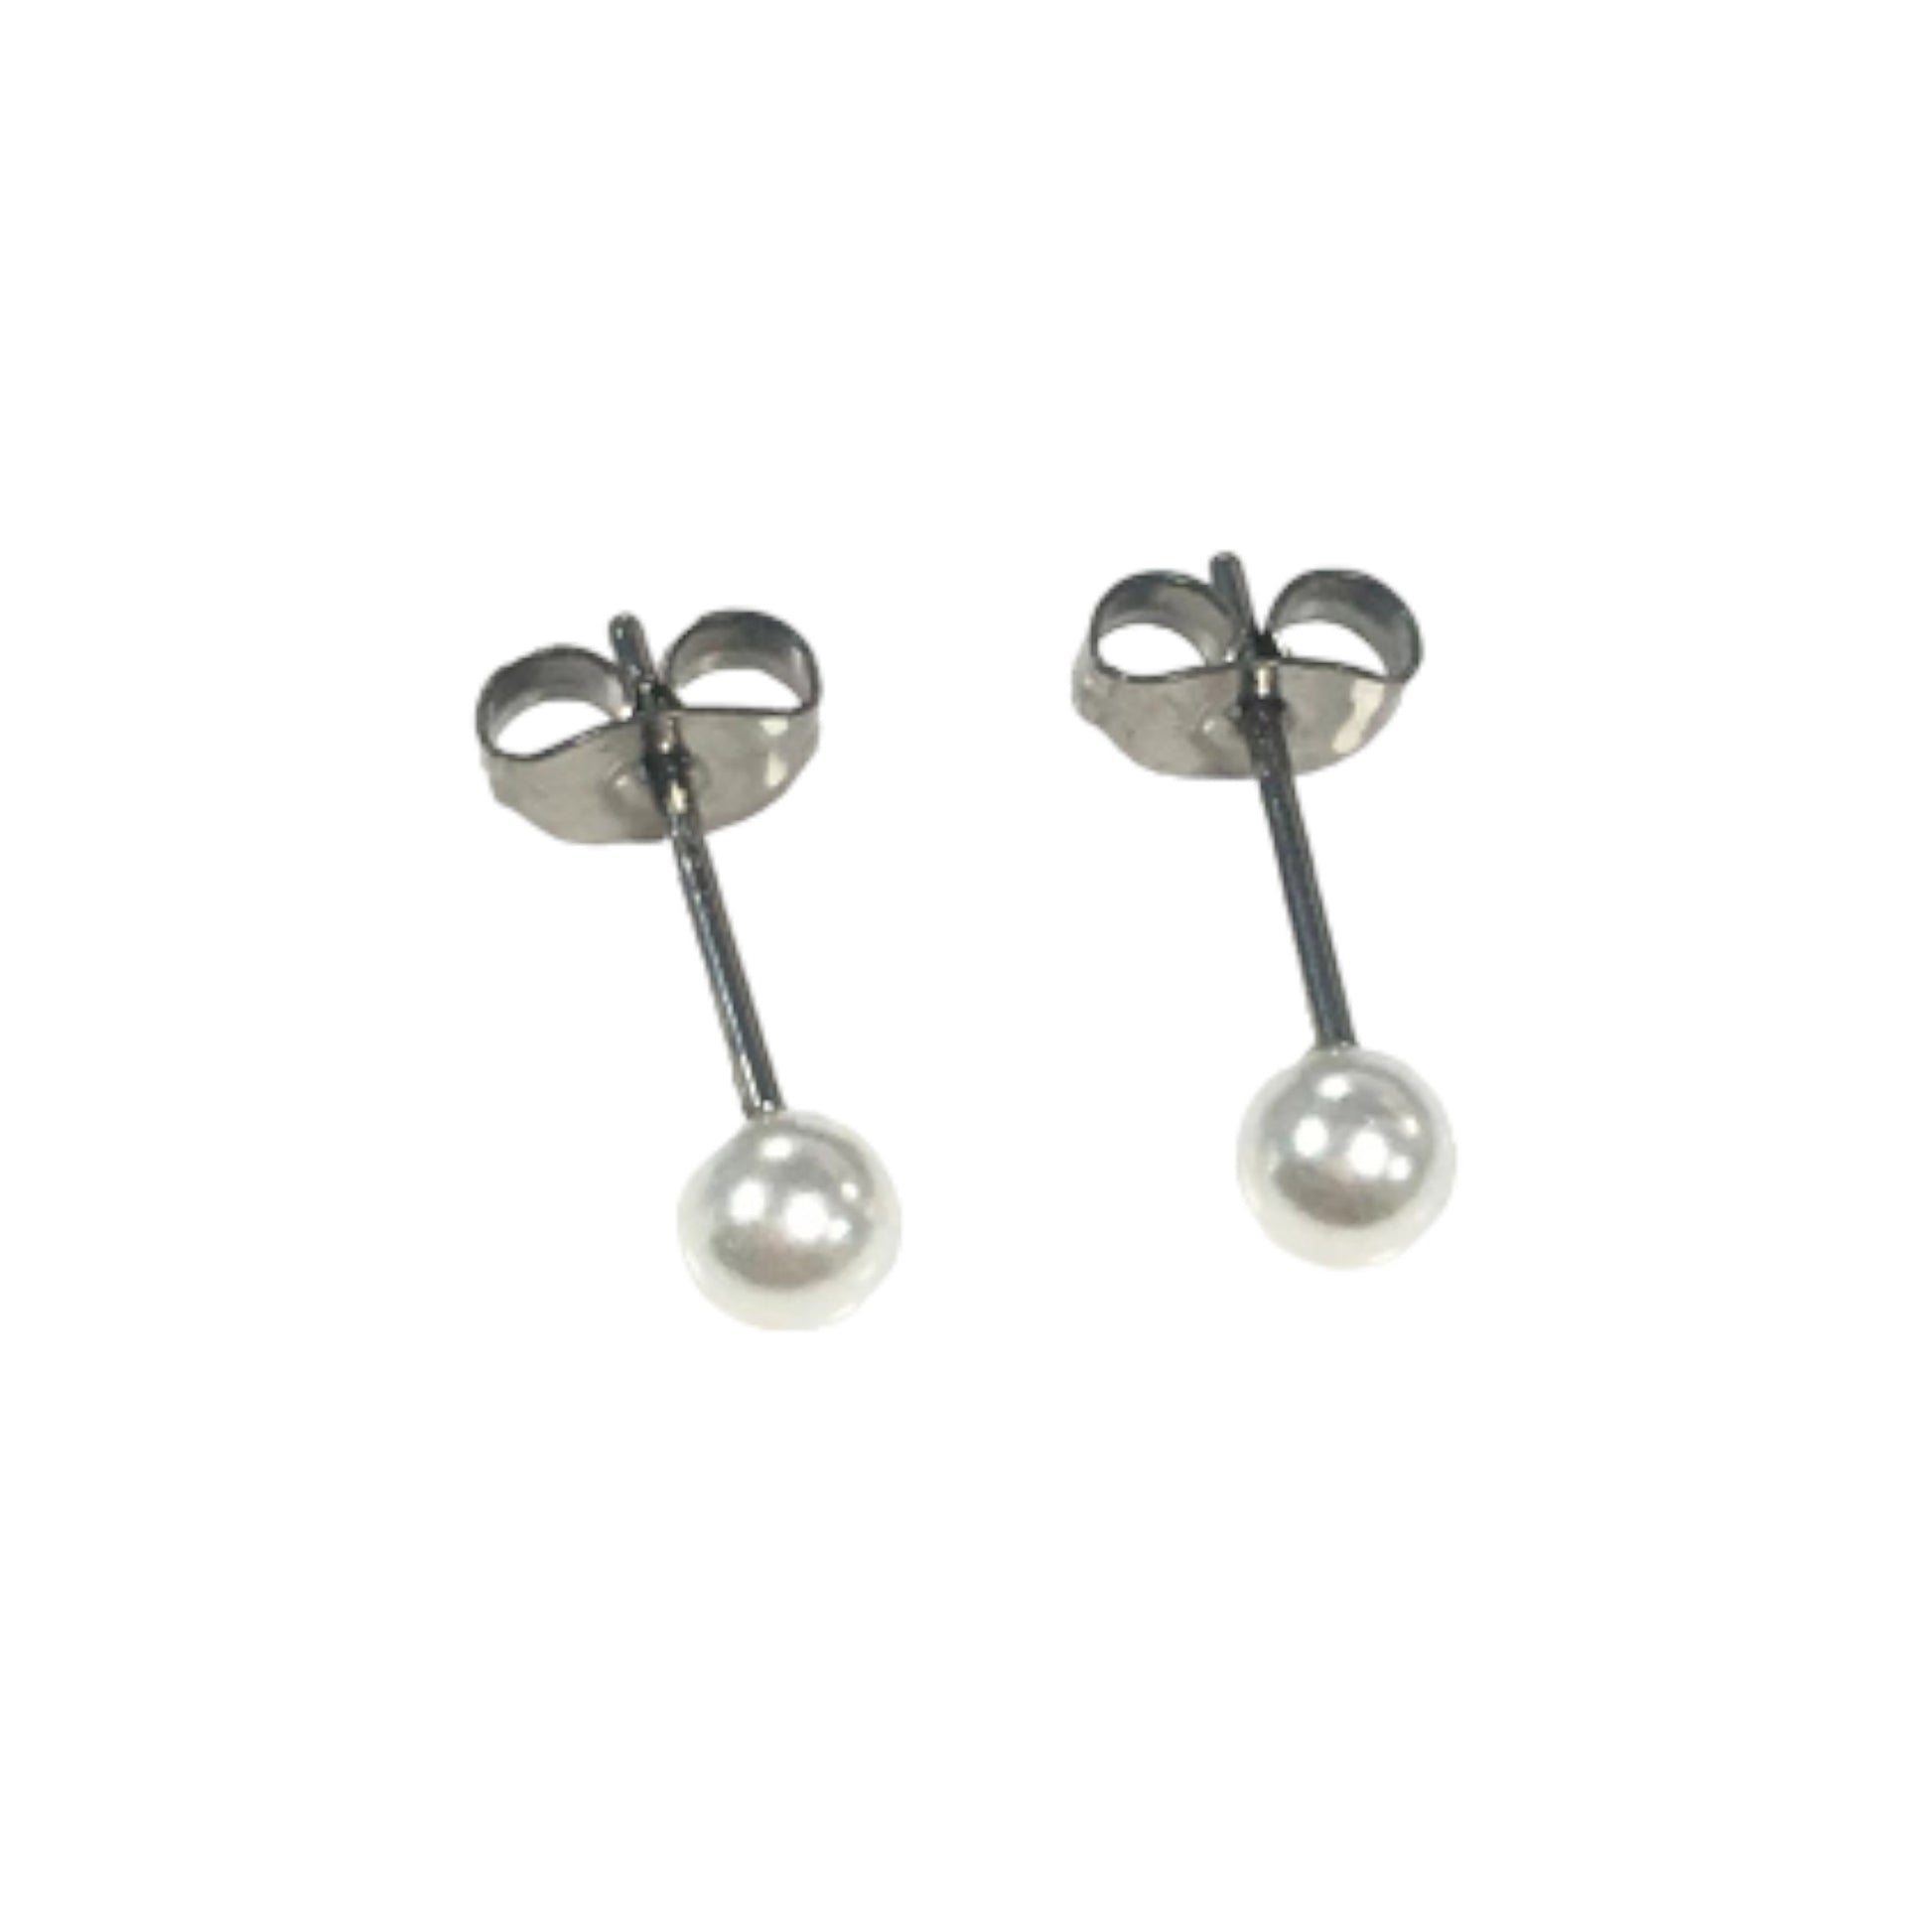 Pearl Studs 4mm -solid titanium studs and backs- Feature a small and minimal design on a white background